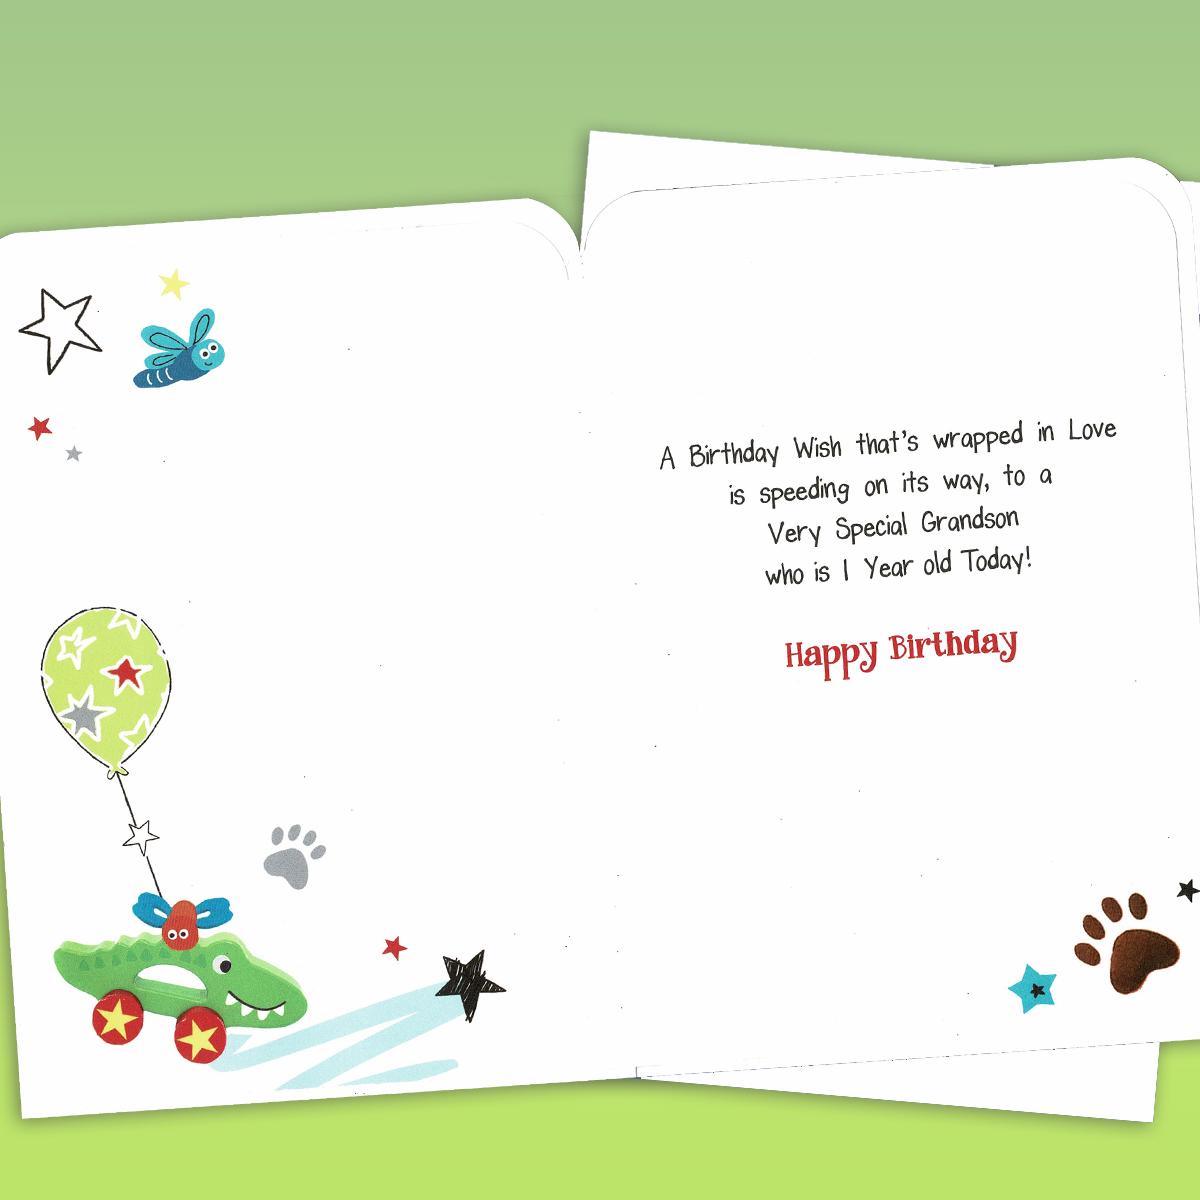 Inside Of Grandson Age 1 Card Showing Layout And Printed Text